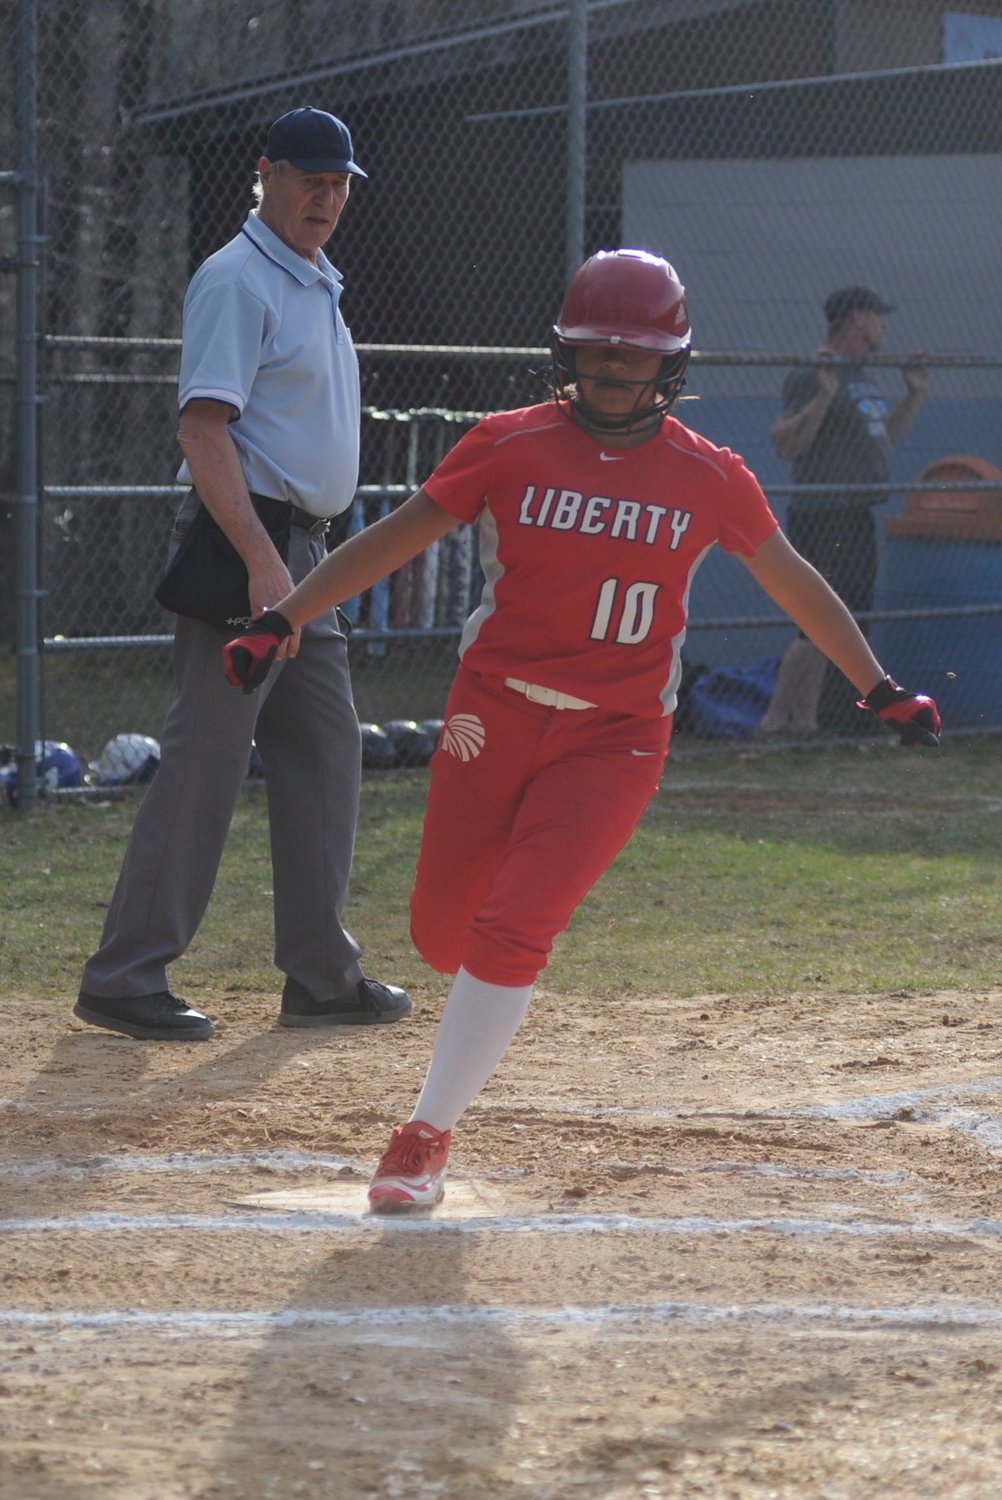 Safe passage. Liberty’s Anna Barragan scores a run in the Lady Indians 16-0 five-inning win over the home team.